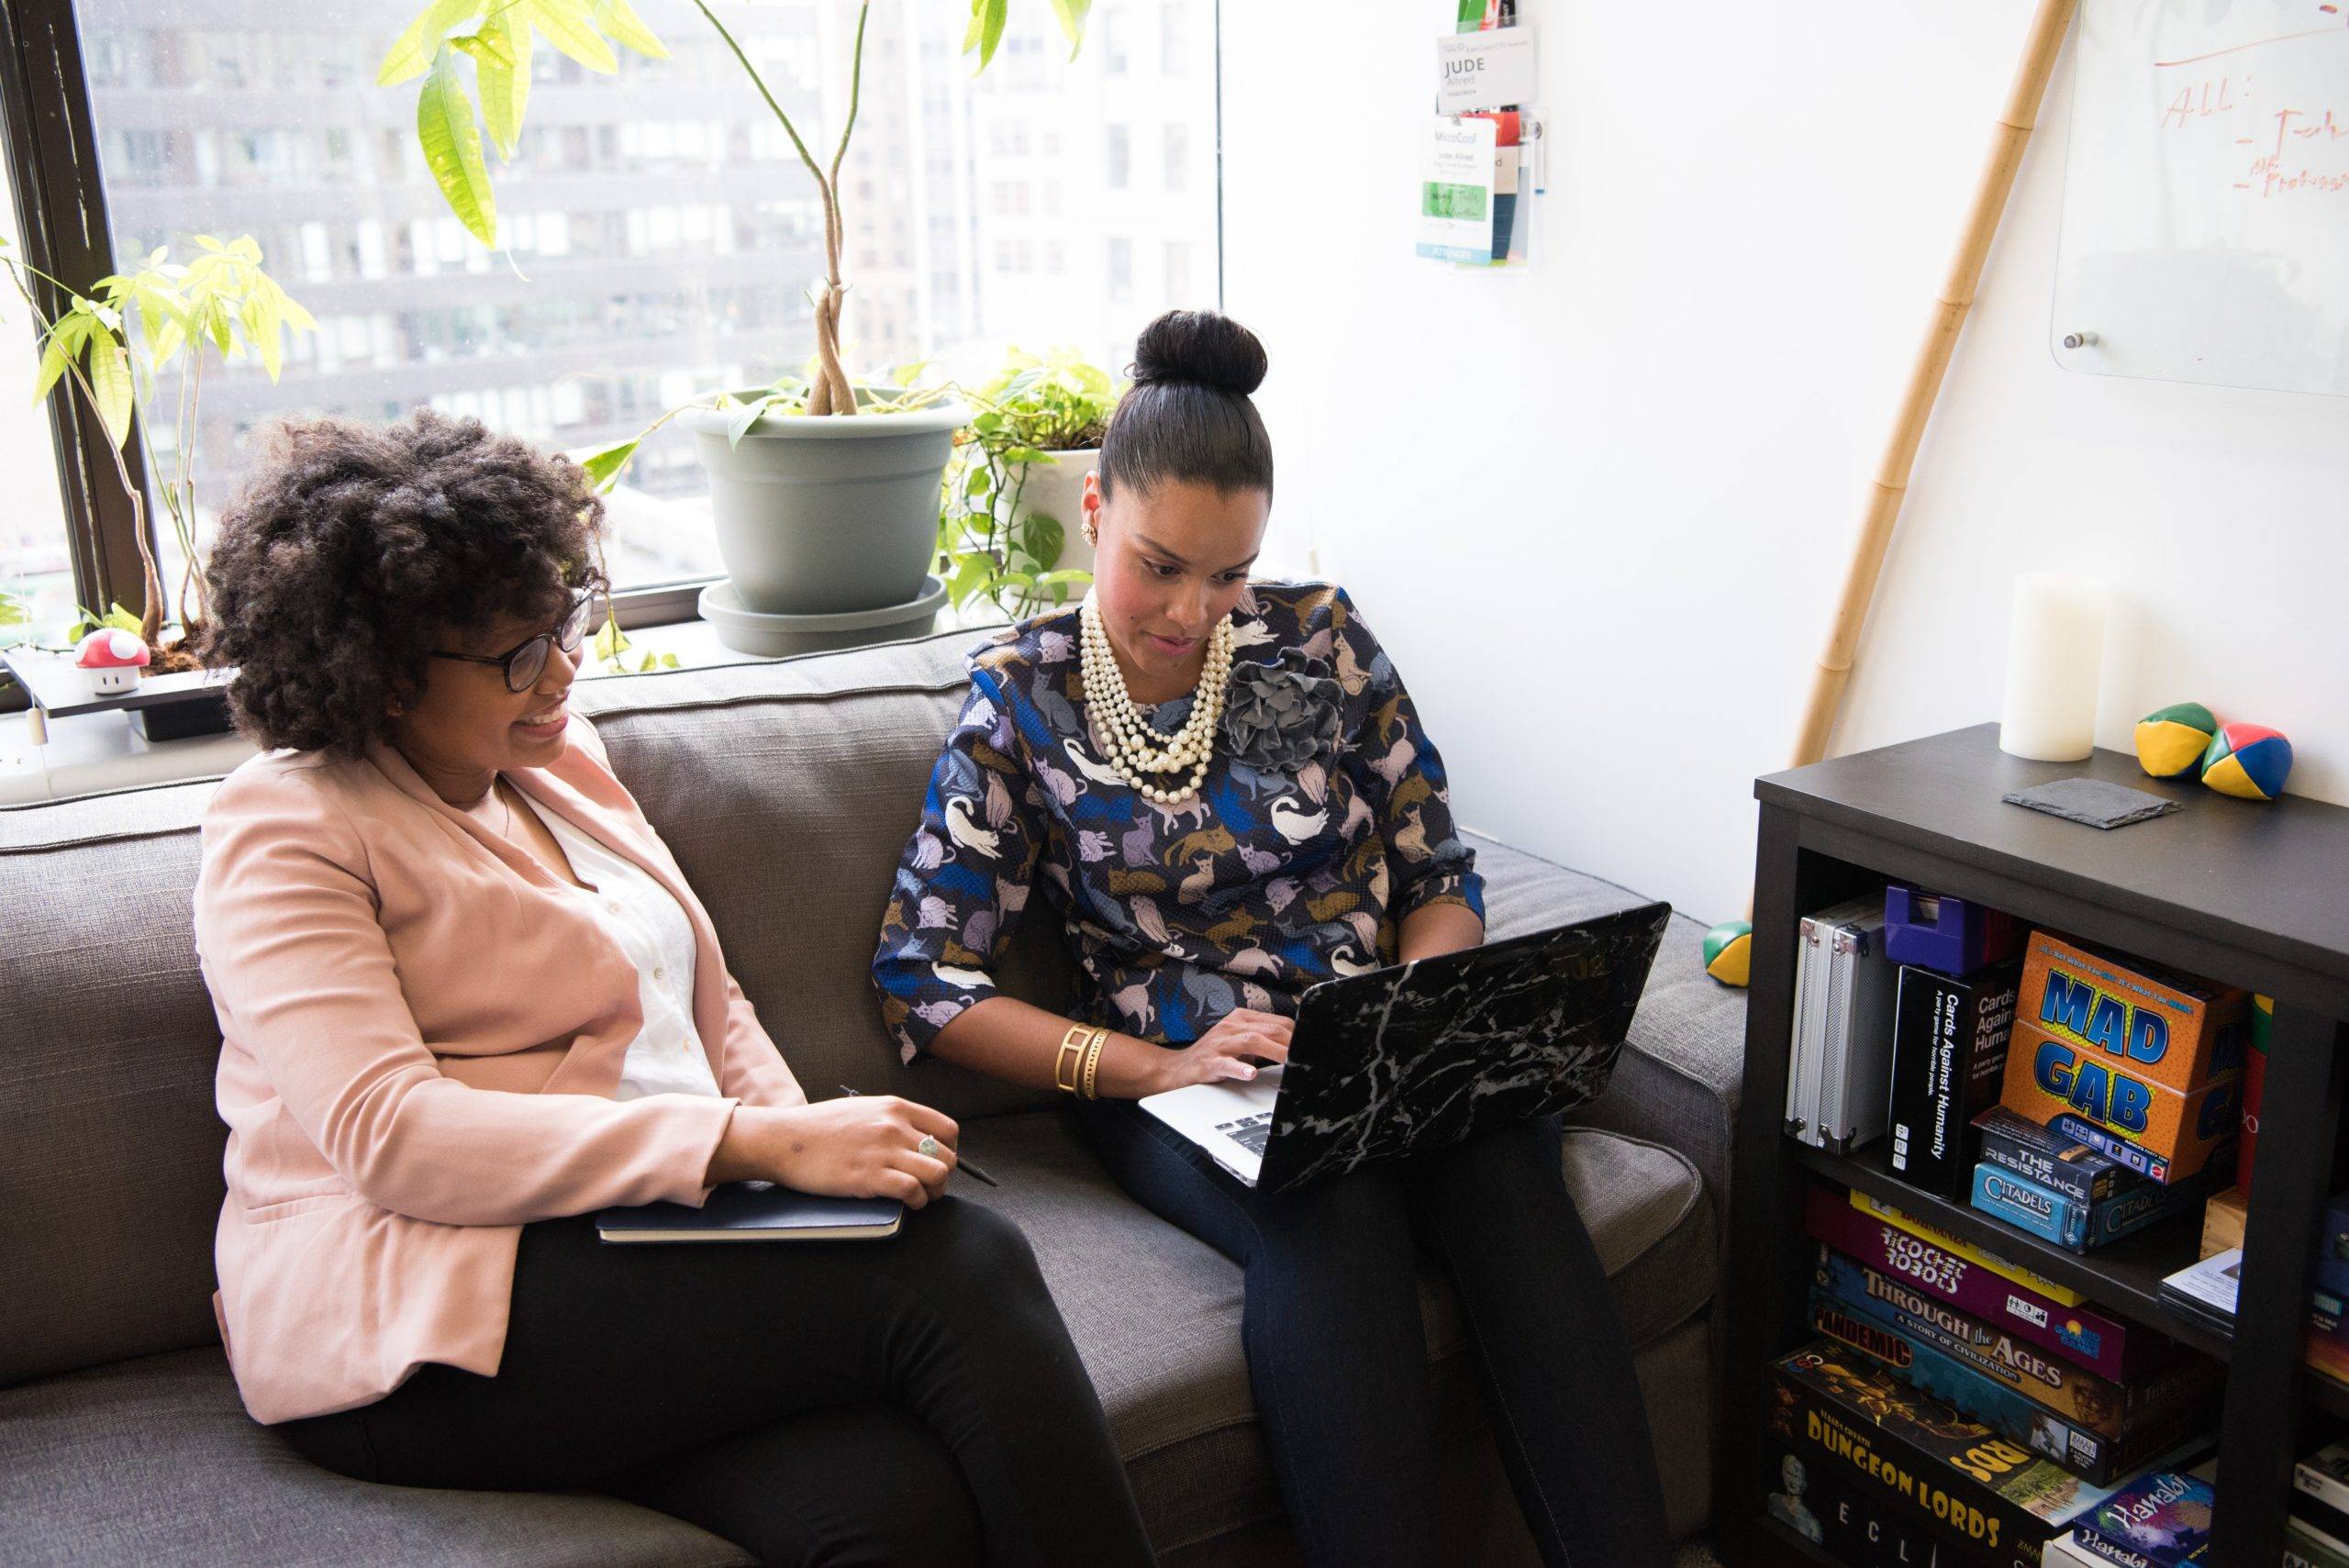 Diverse woman working together in an office.